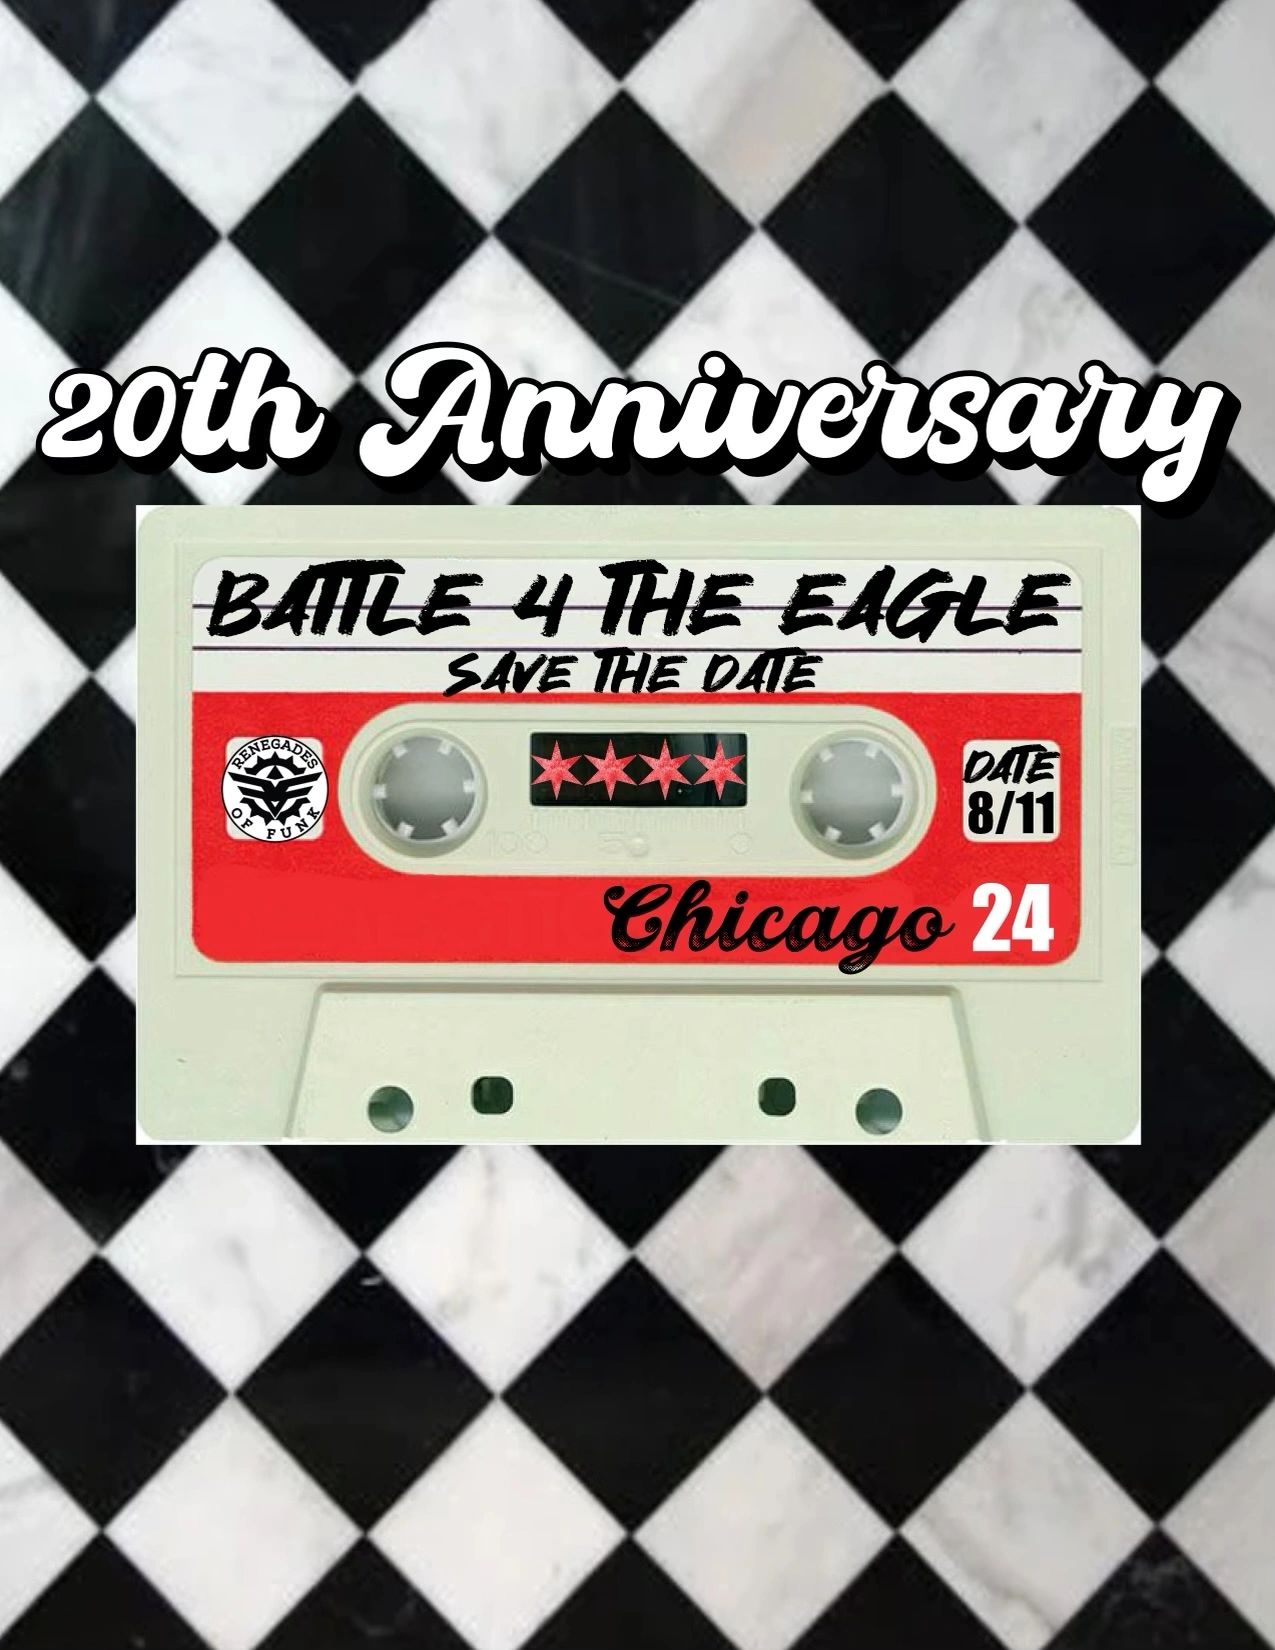 Battle 4 The Eagle August 11, 2024 Celebrating our 20 year anniversary. Taking place in Logan Square